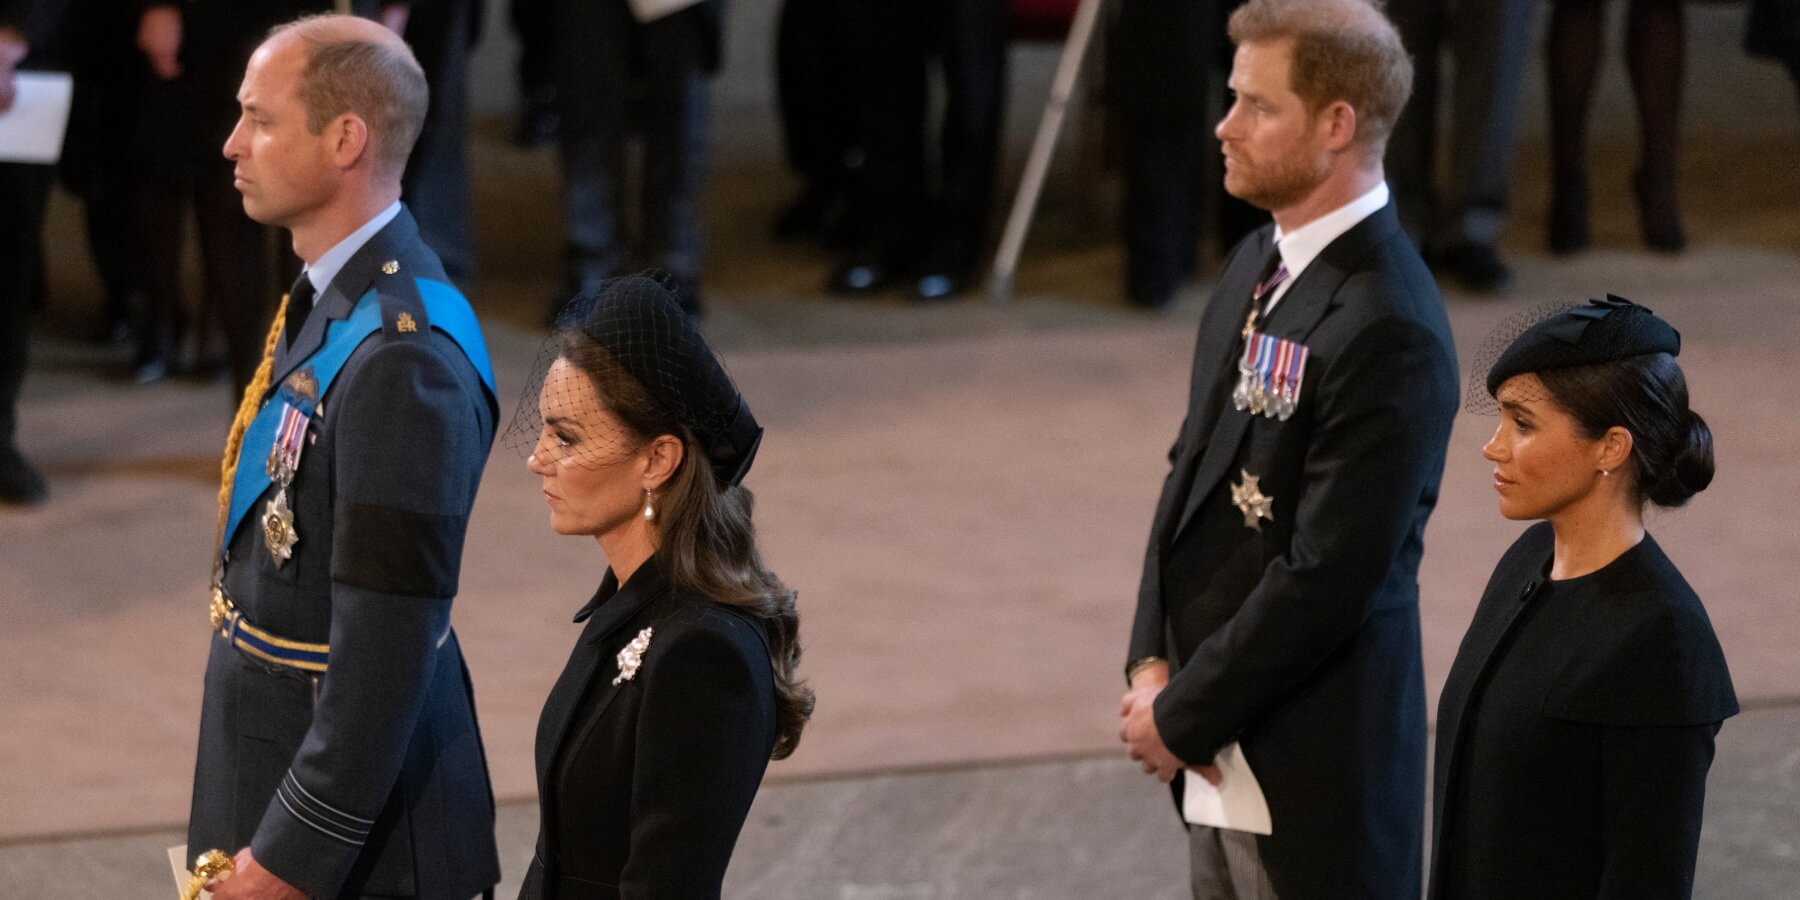 Prince William, Kate Middleton, Prince Harry and Meghan Markle attend Queen Elizabeth's funeral in September 2022.